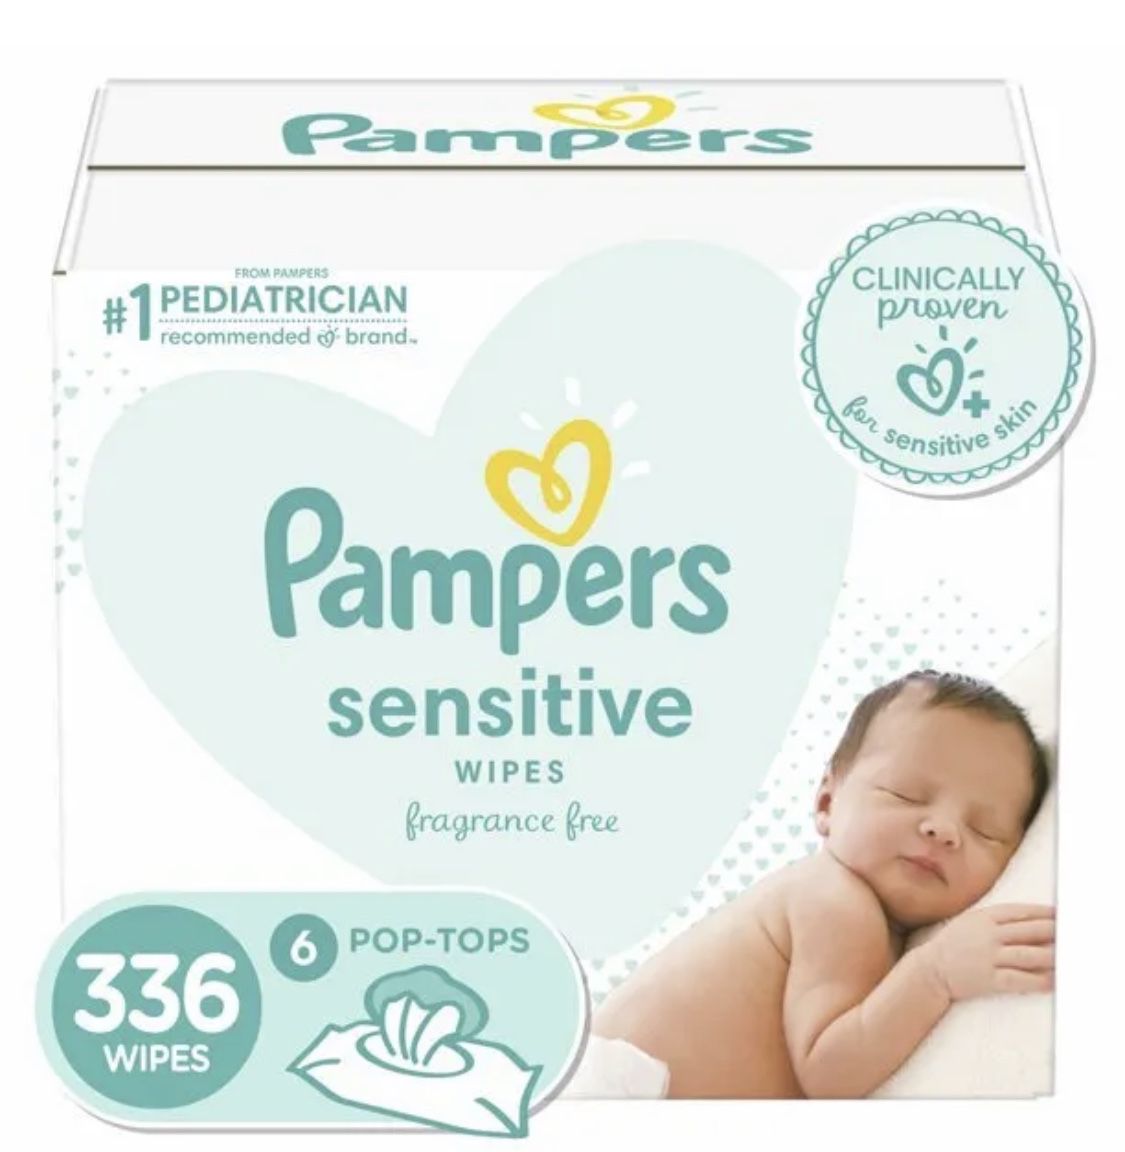 Pampers Sensitive Wipes 336 Count